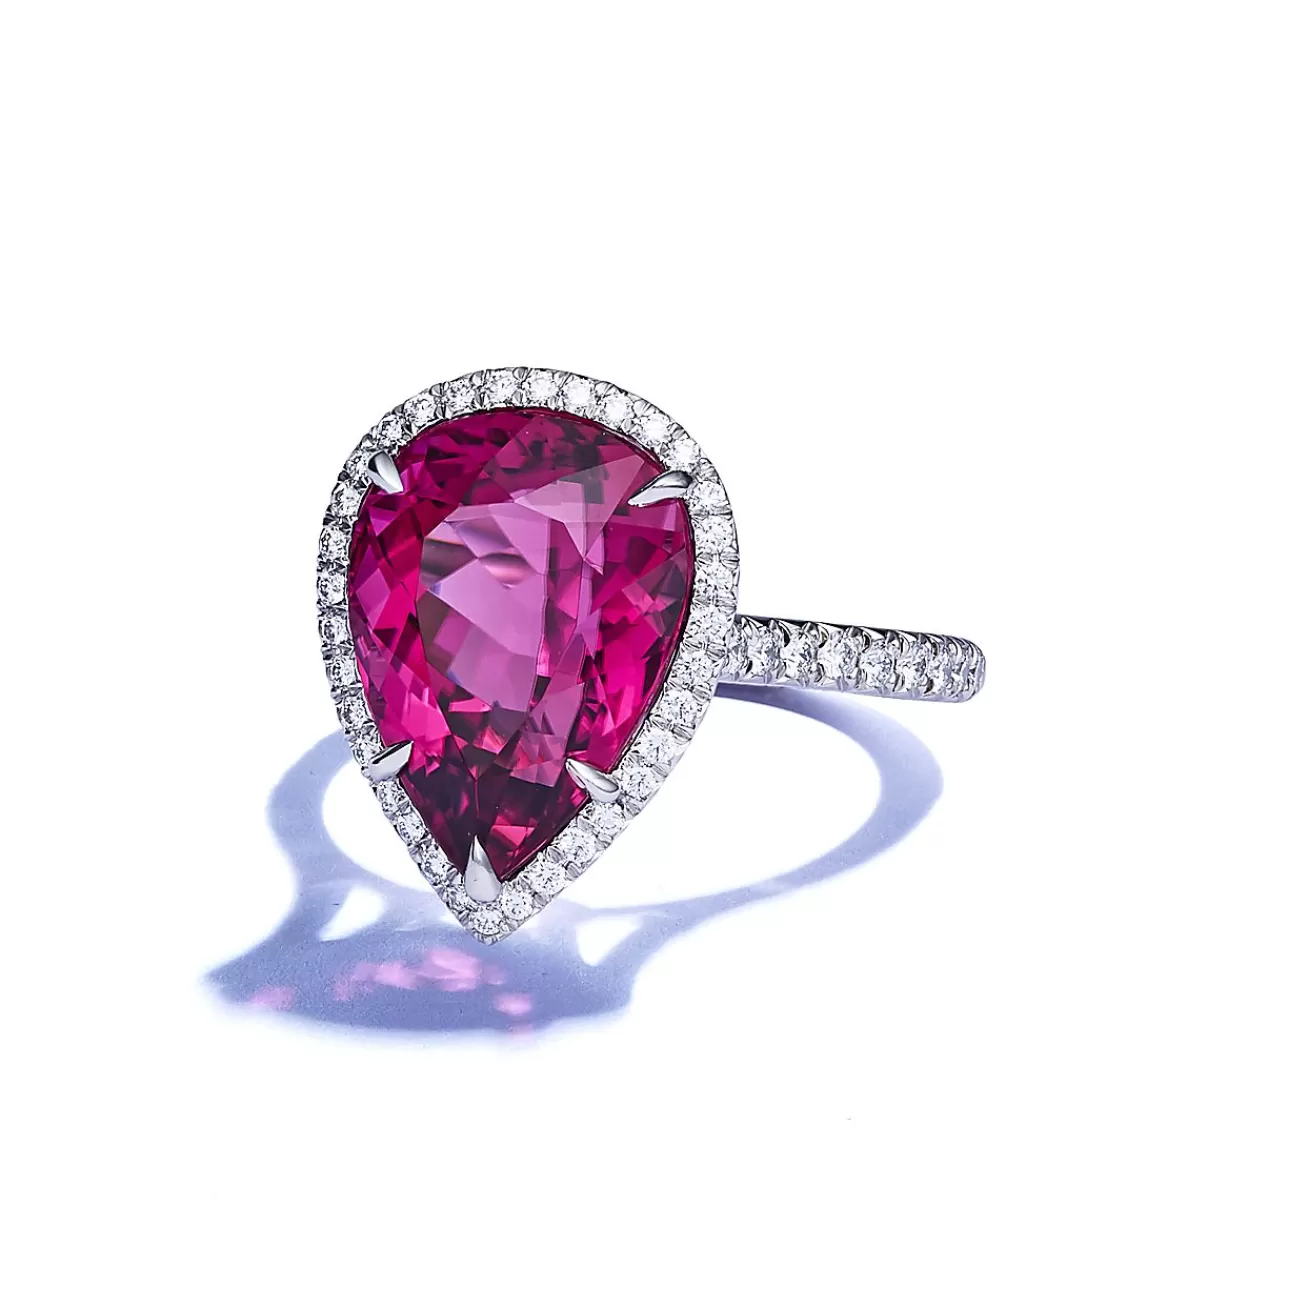 Tiffany & Co. Ring in Platinum with a Rubellite and Diamonds | ^ Rings | Diamond Jewelry